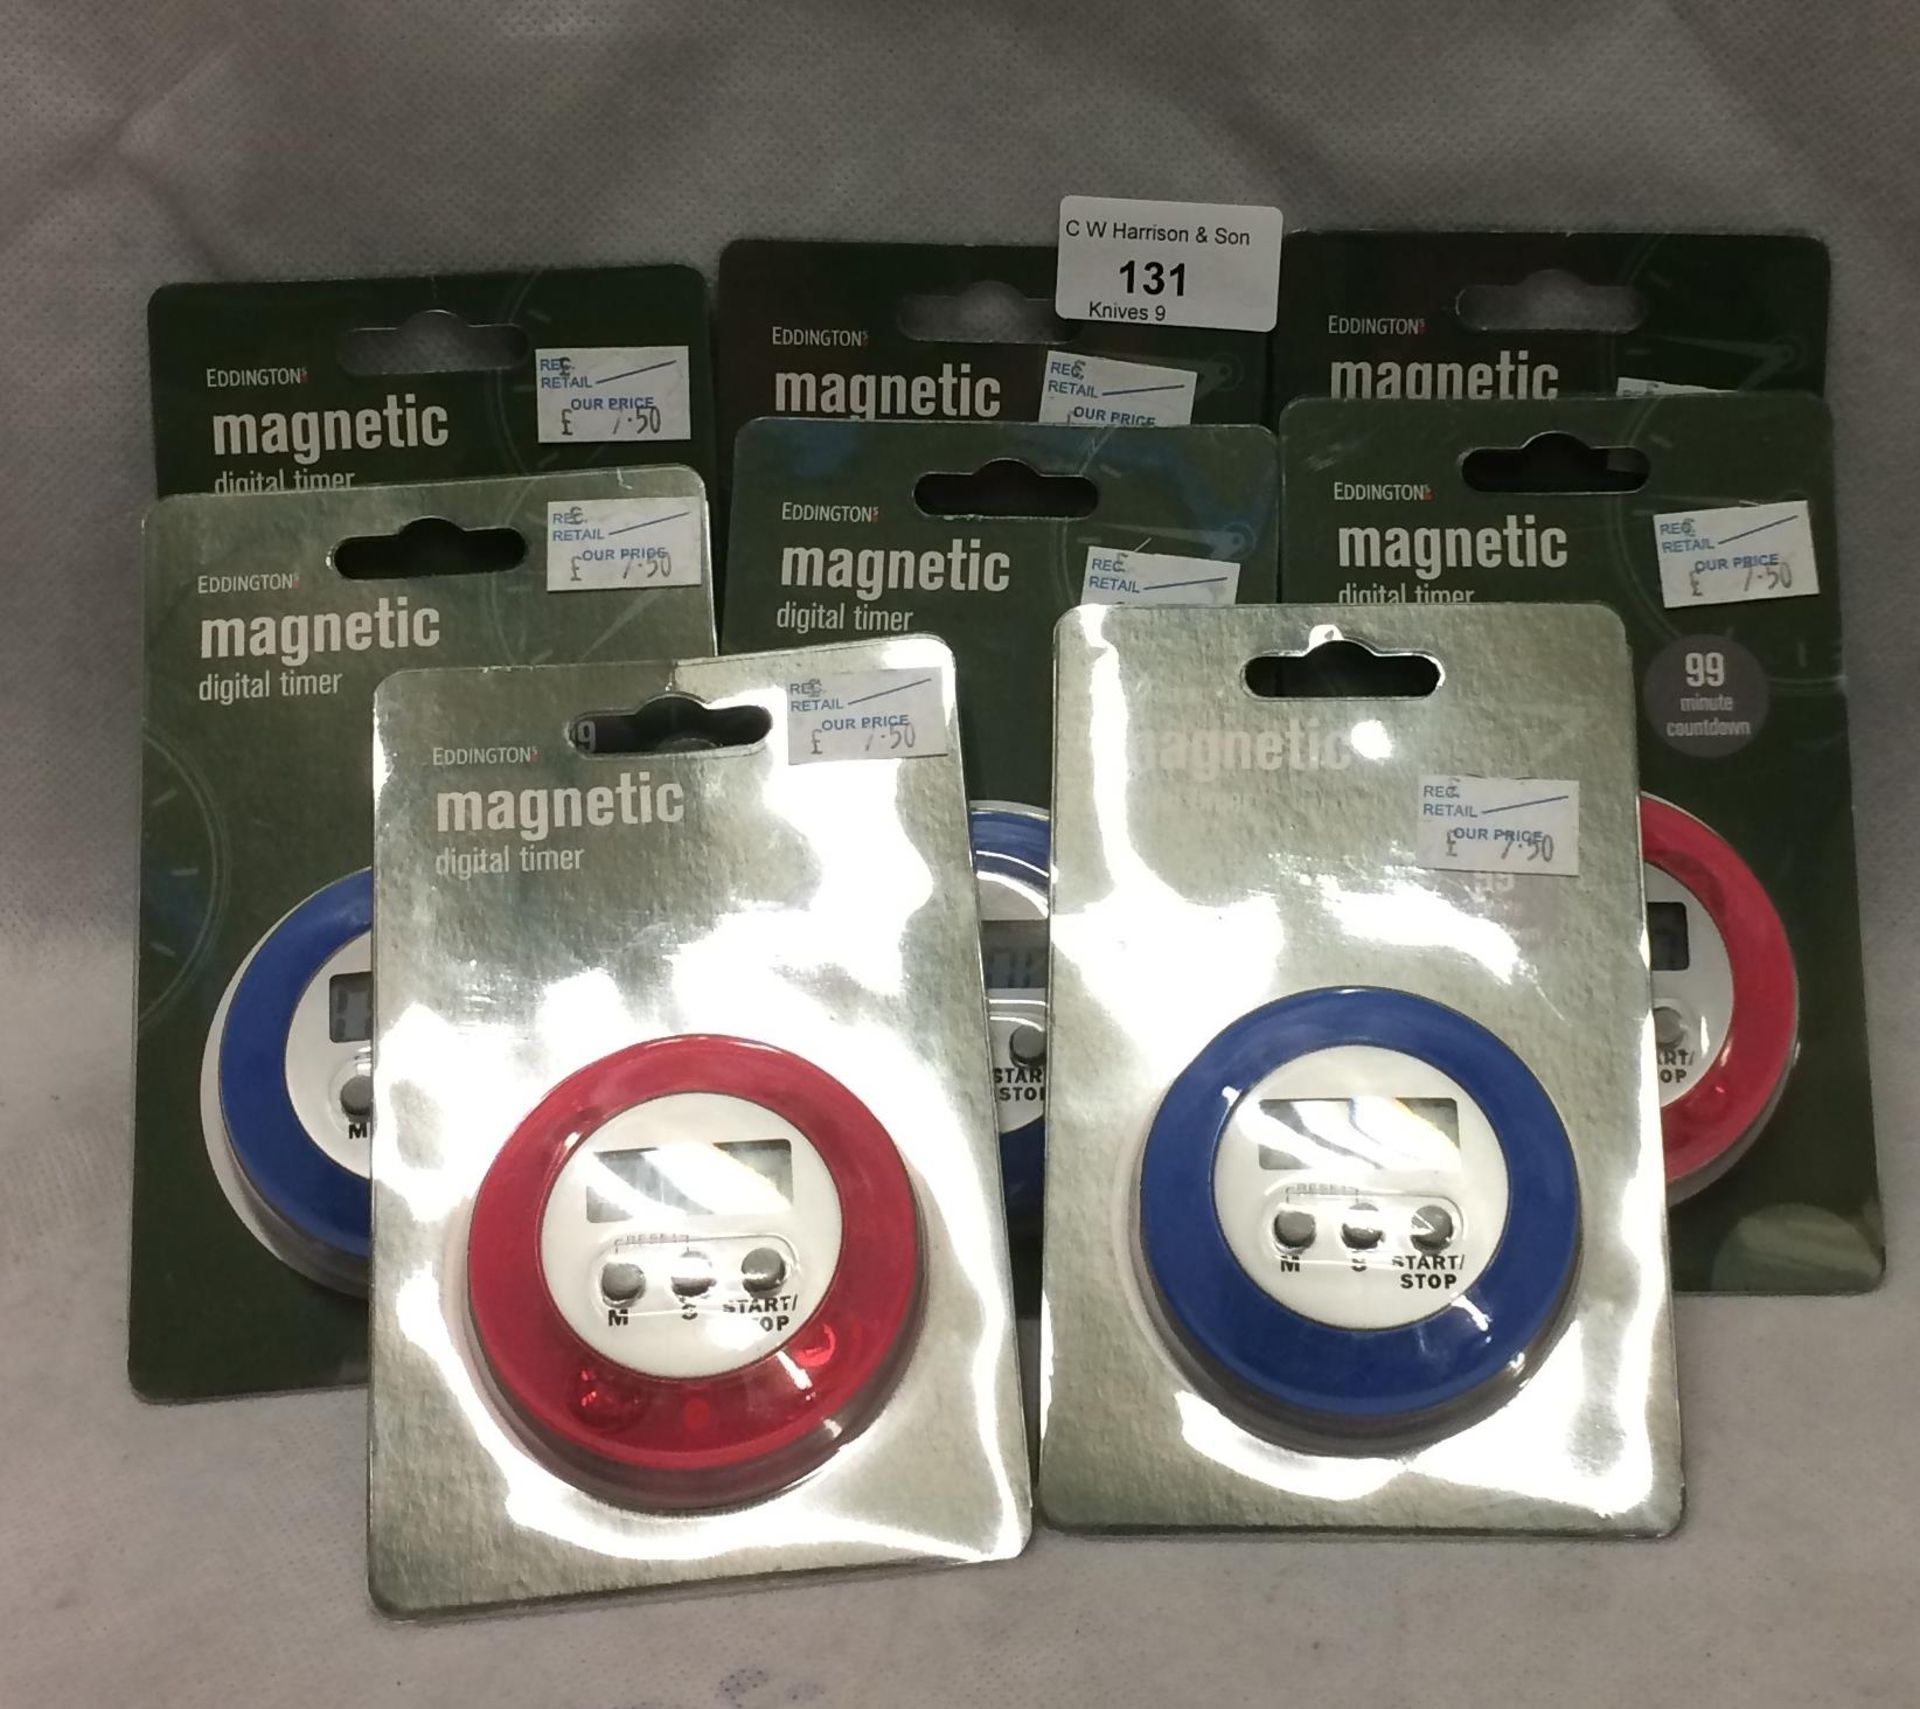 11 x Magnetic Digital Timers RRP £7.50 e